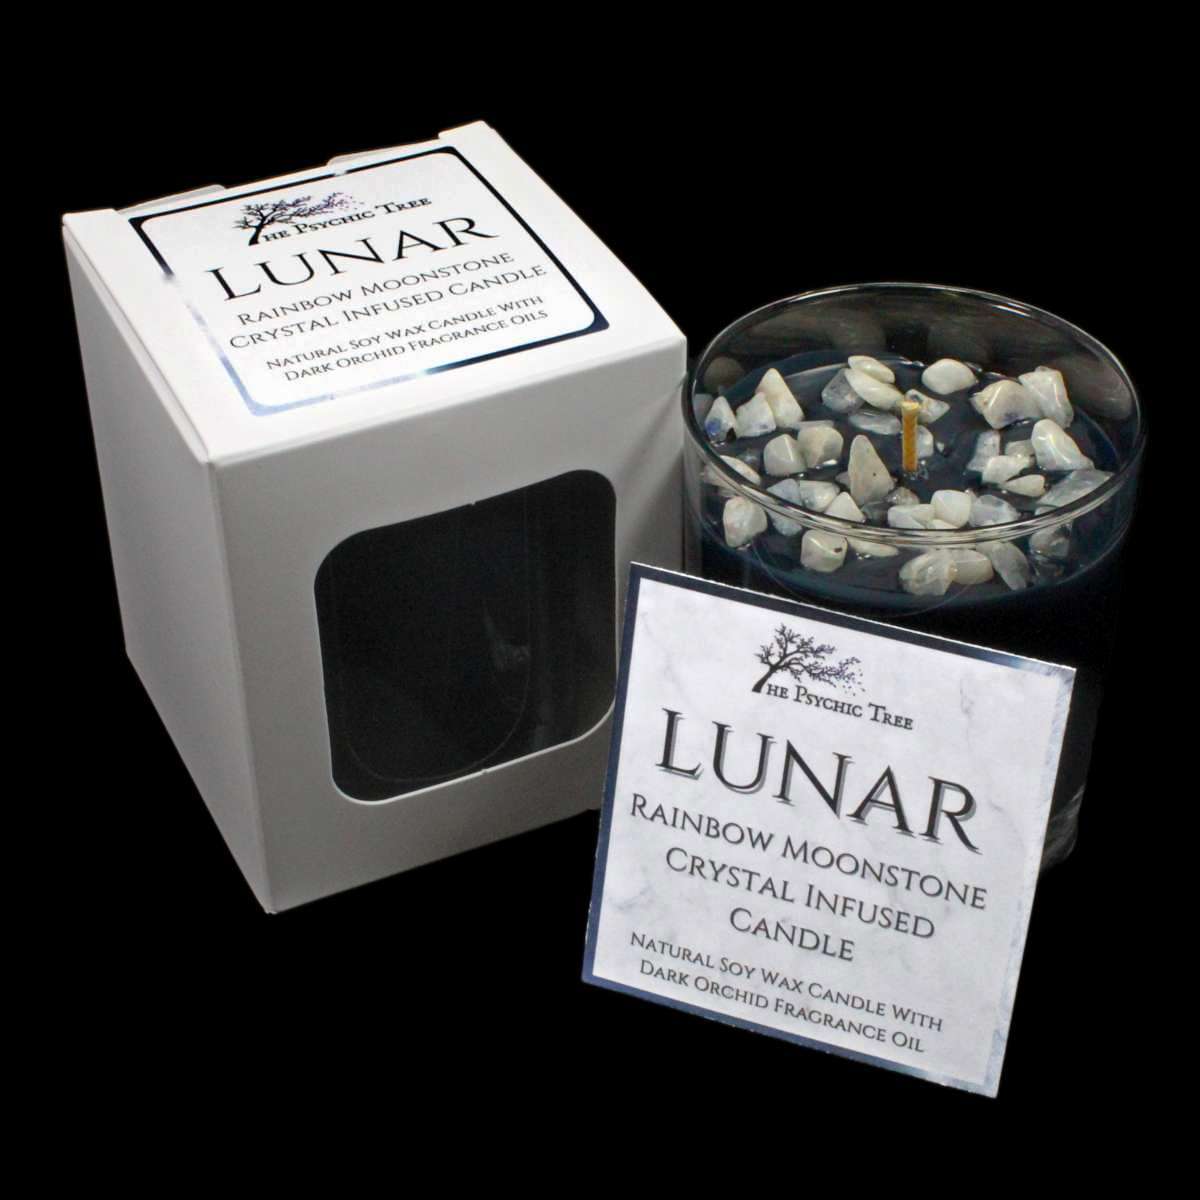 Lunar - Crystal Infused Scented Candle